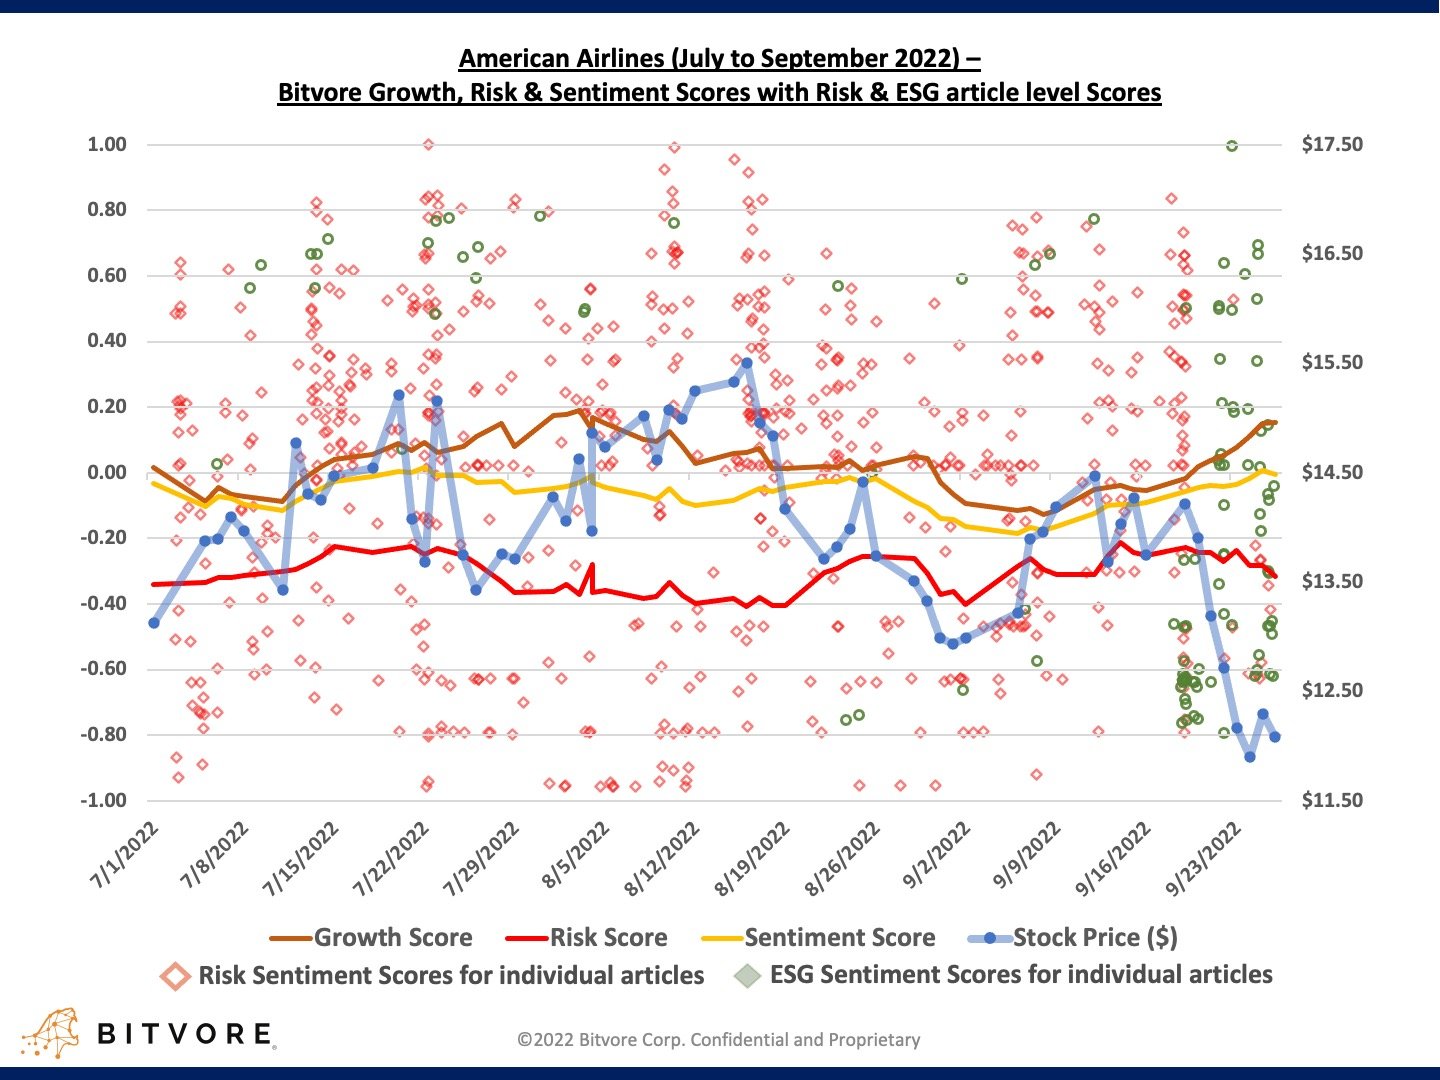 American Airline growth risk and sentiment scores with article level esg scores and stock price July to Sept 2022